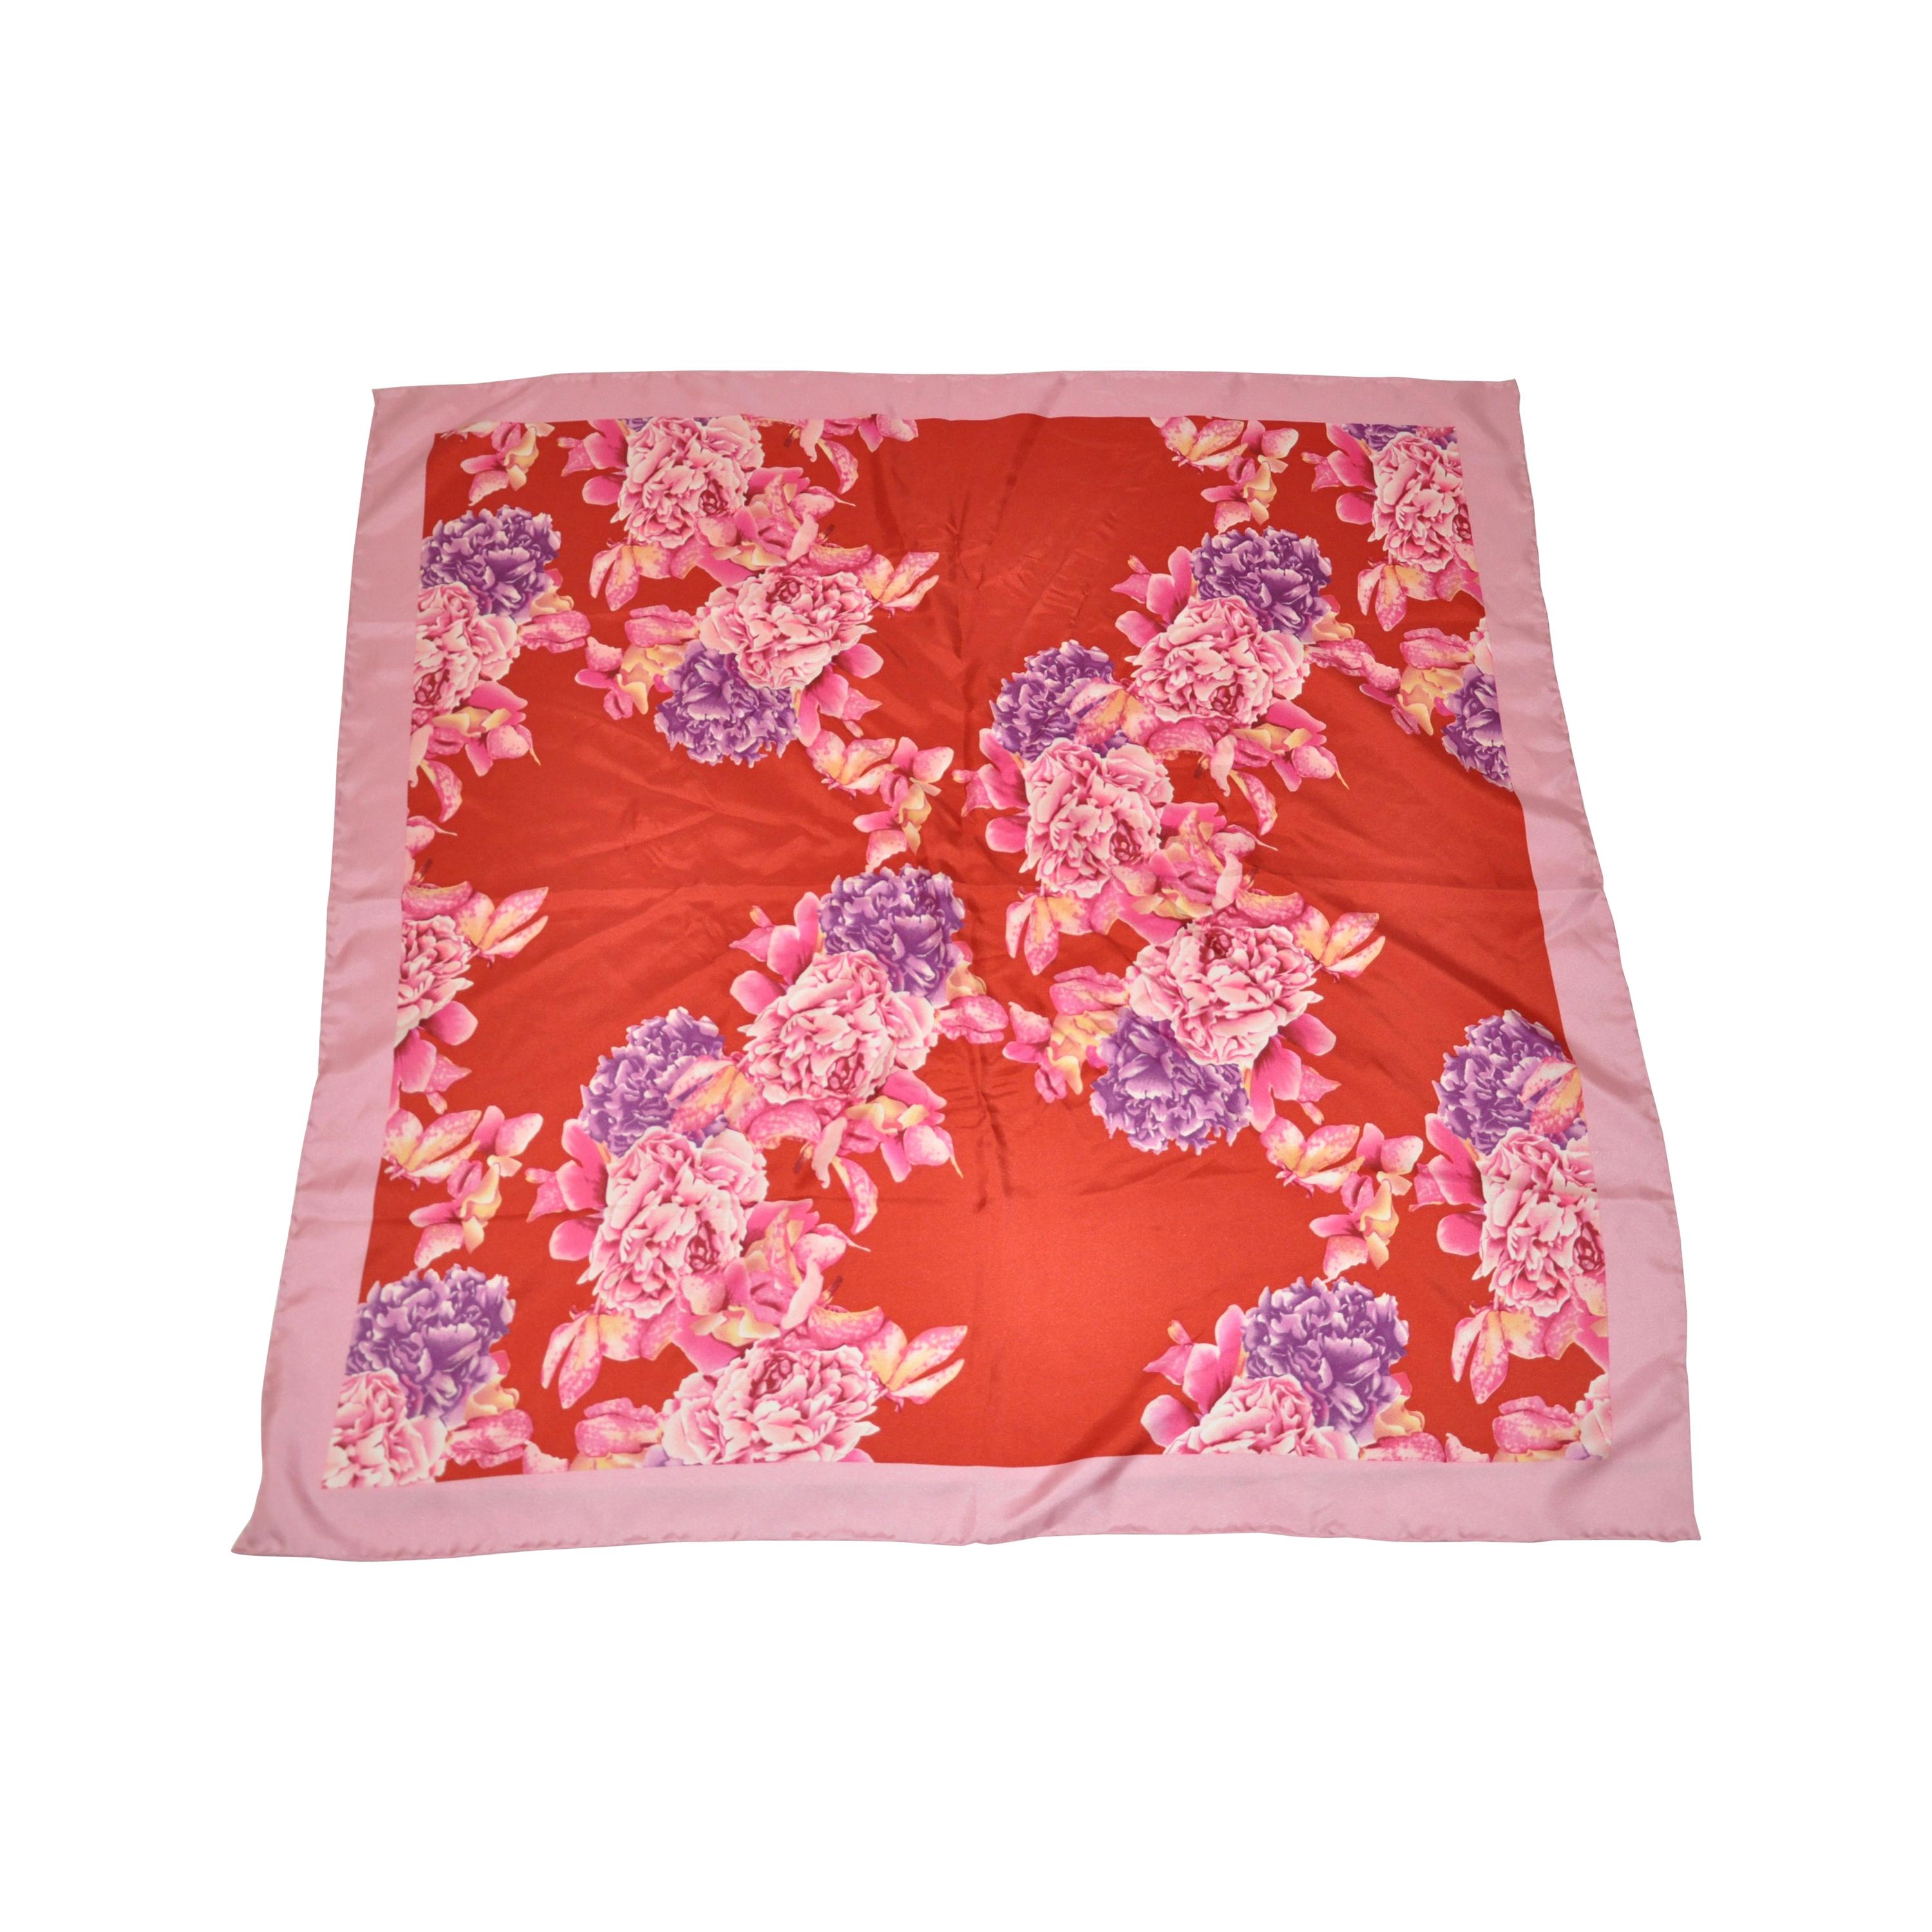 Majestic & Beautiful Vivid "Shades of Red, Pink & Violet  Roses"  Silk Scarf 